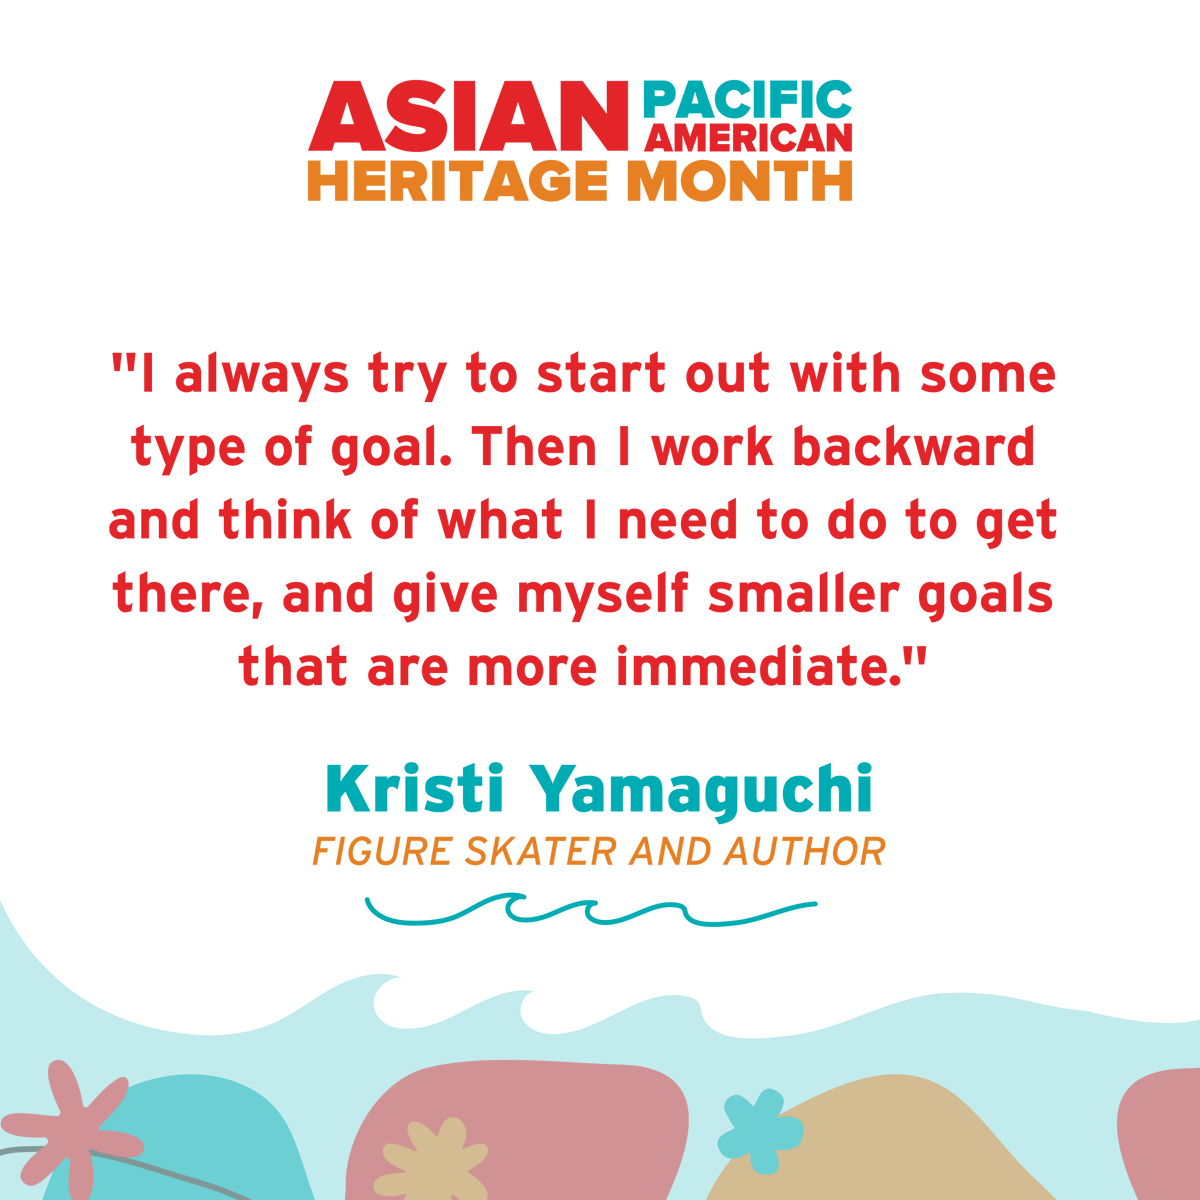 This Wisdom Wednesday's quote comes from Olympic figure skater and author Kristi Yamaguchi: ' I always try to start out with some type of goal. Then I work backward and think of what I need to do to get there, and give myself smaller goals that are more immediate.' #AAPI